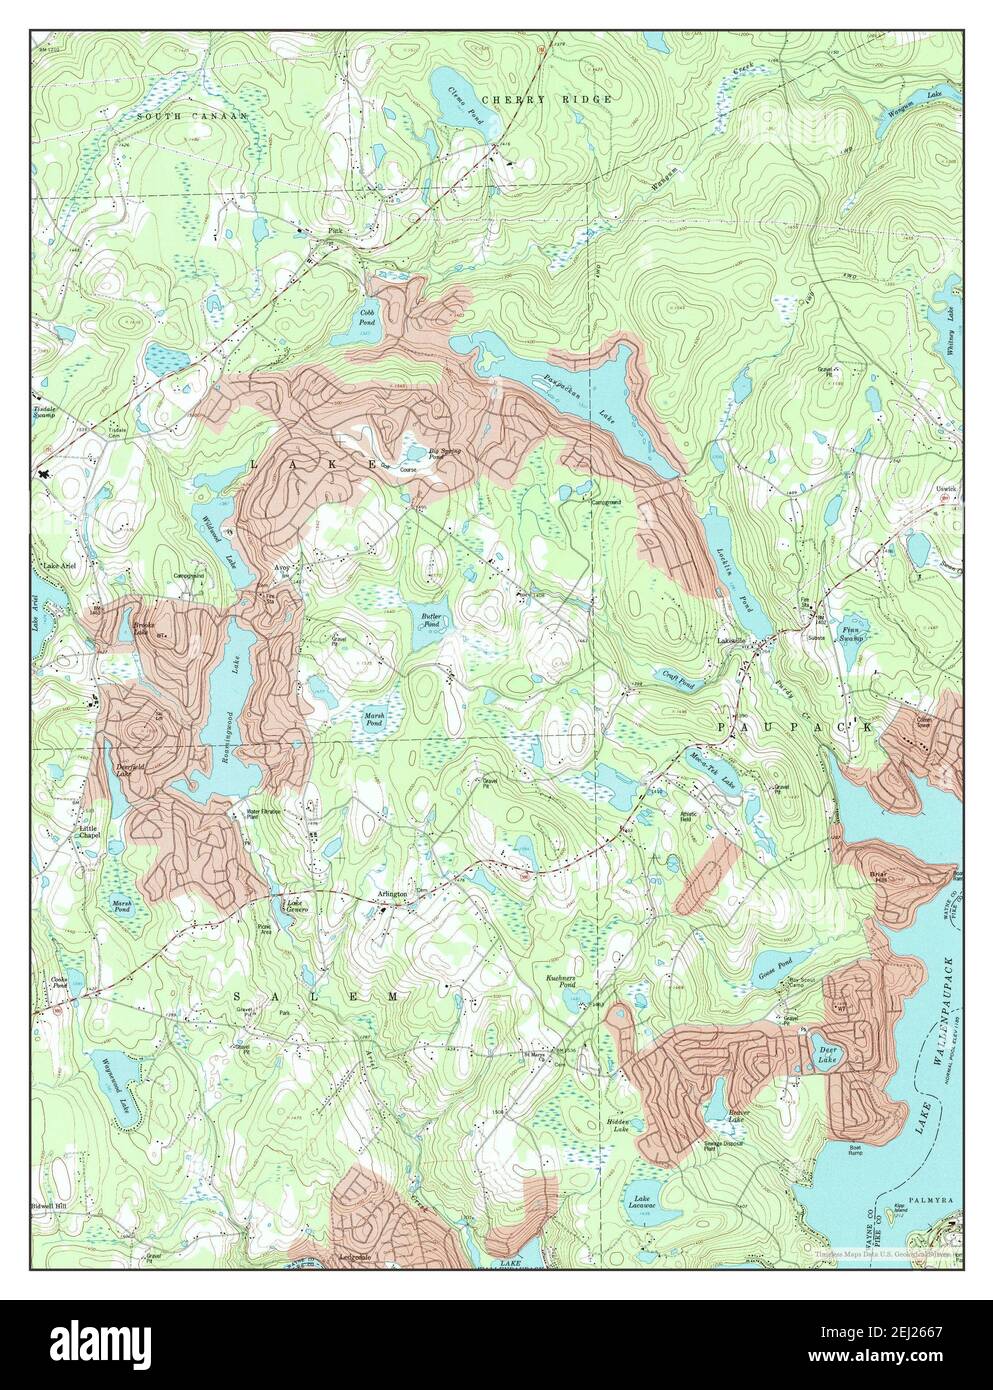 Lakeville, Pennsylvania, map 1994, 1:24000, United States of America by Timeless Maps, data U.S. Geological Survey Stock Photo